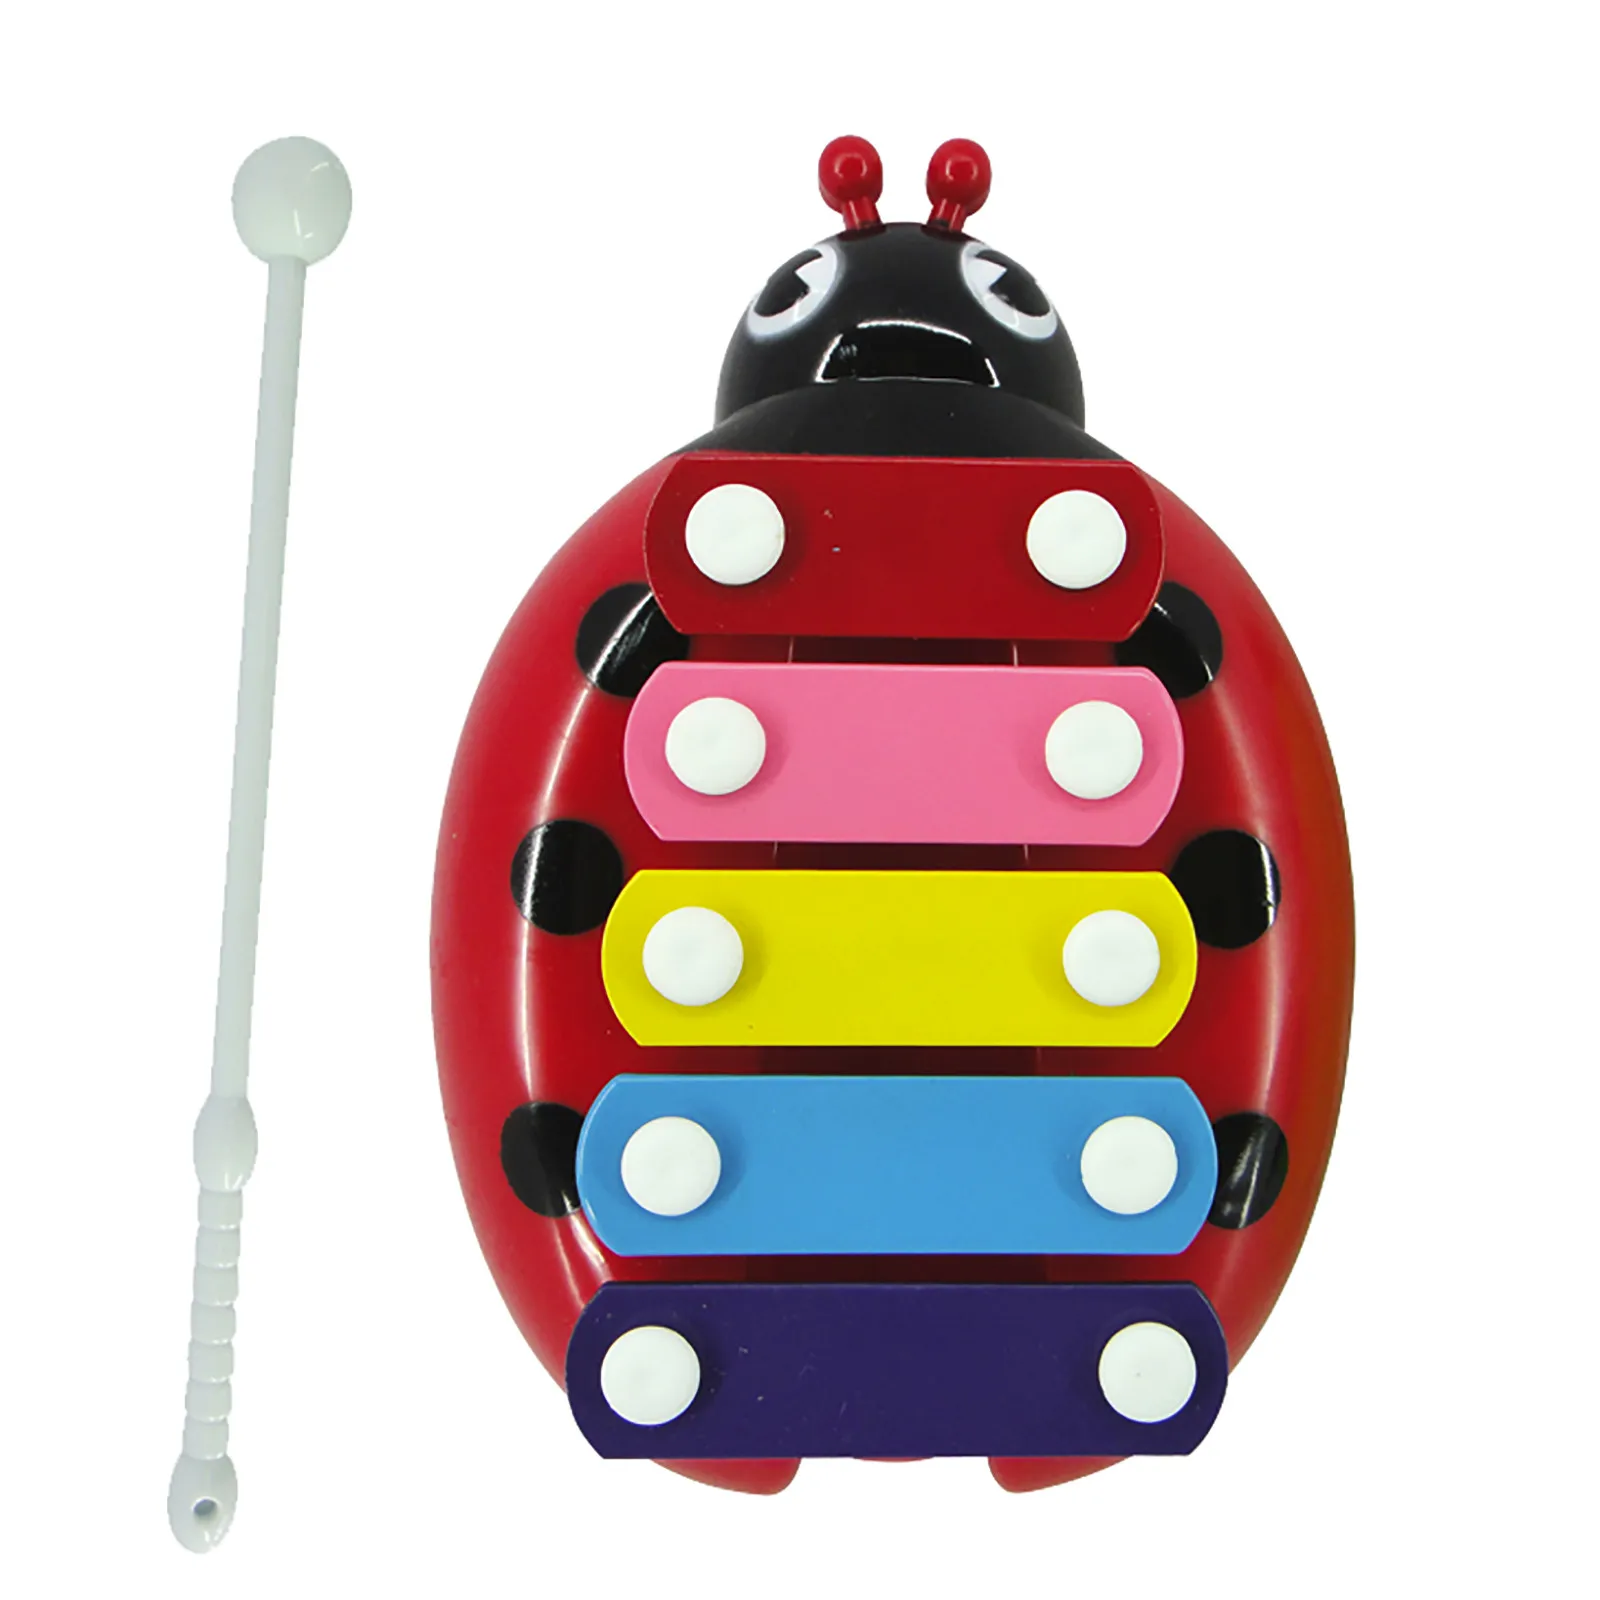 5-Note Xylophone Musical Toy Beetle Design Kids Child Toy Early Education U7H2 